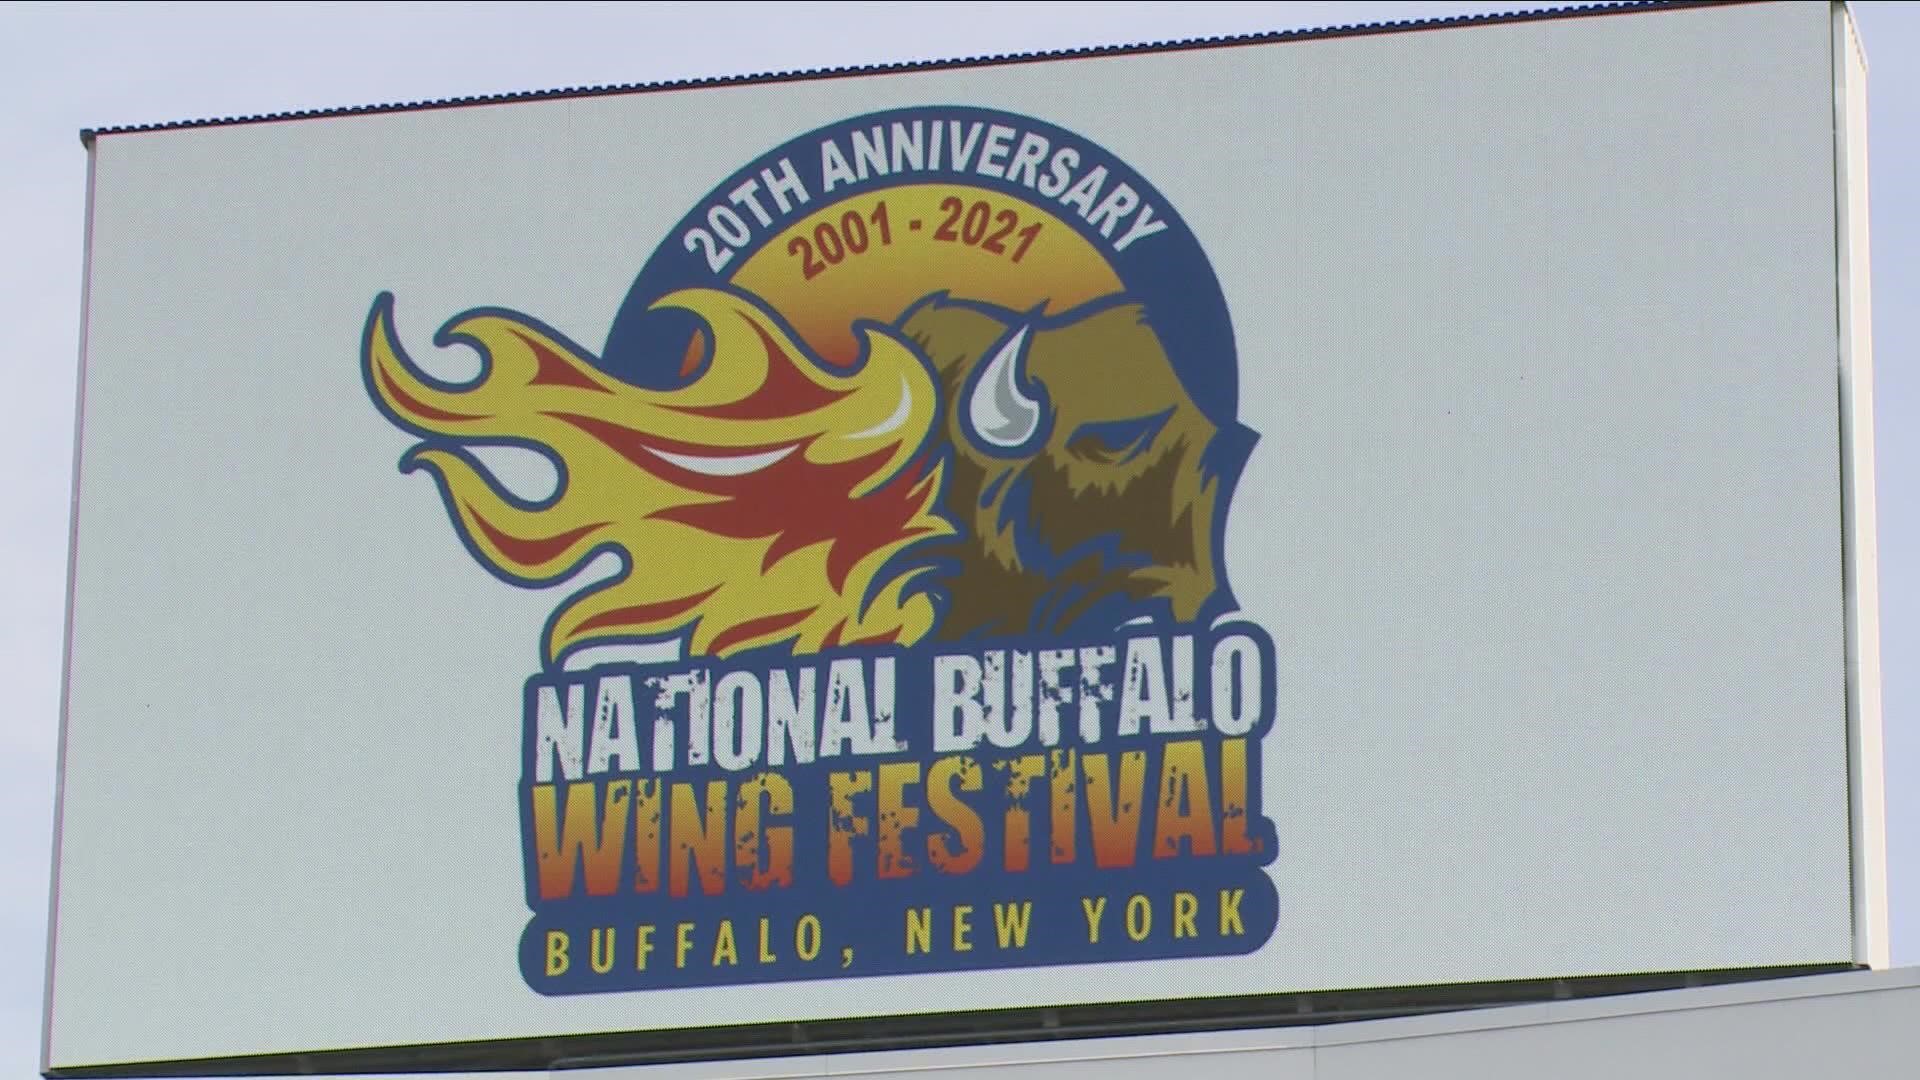 From the National Buffalo Wing Festival to the Ballpark Brew Bash, there's plenty to do.